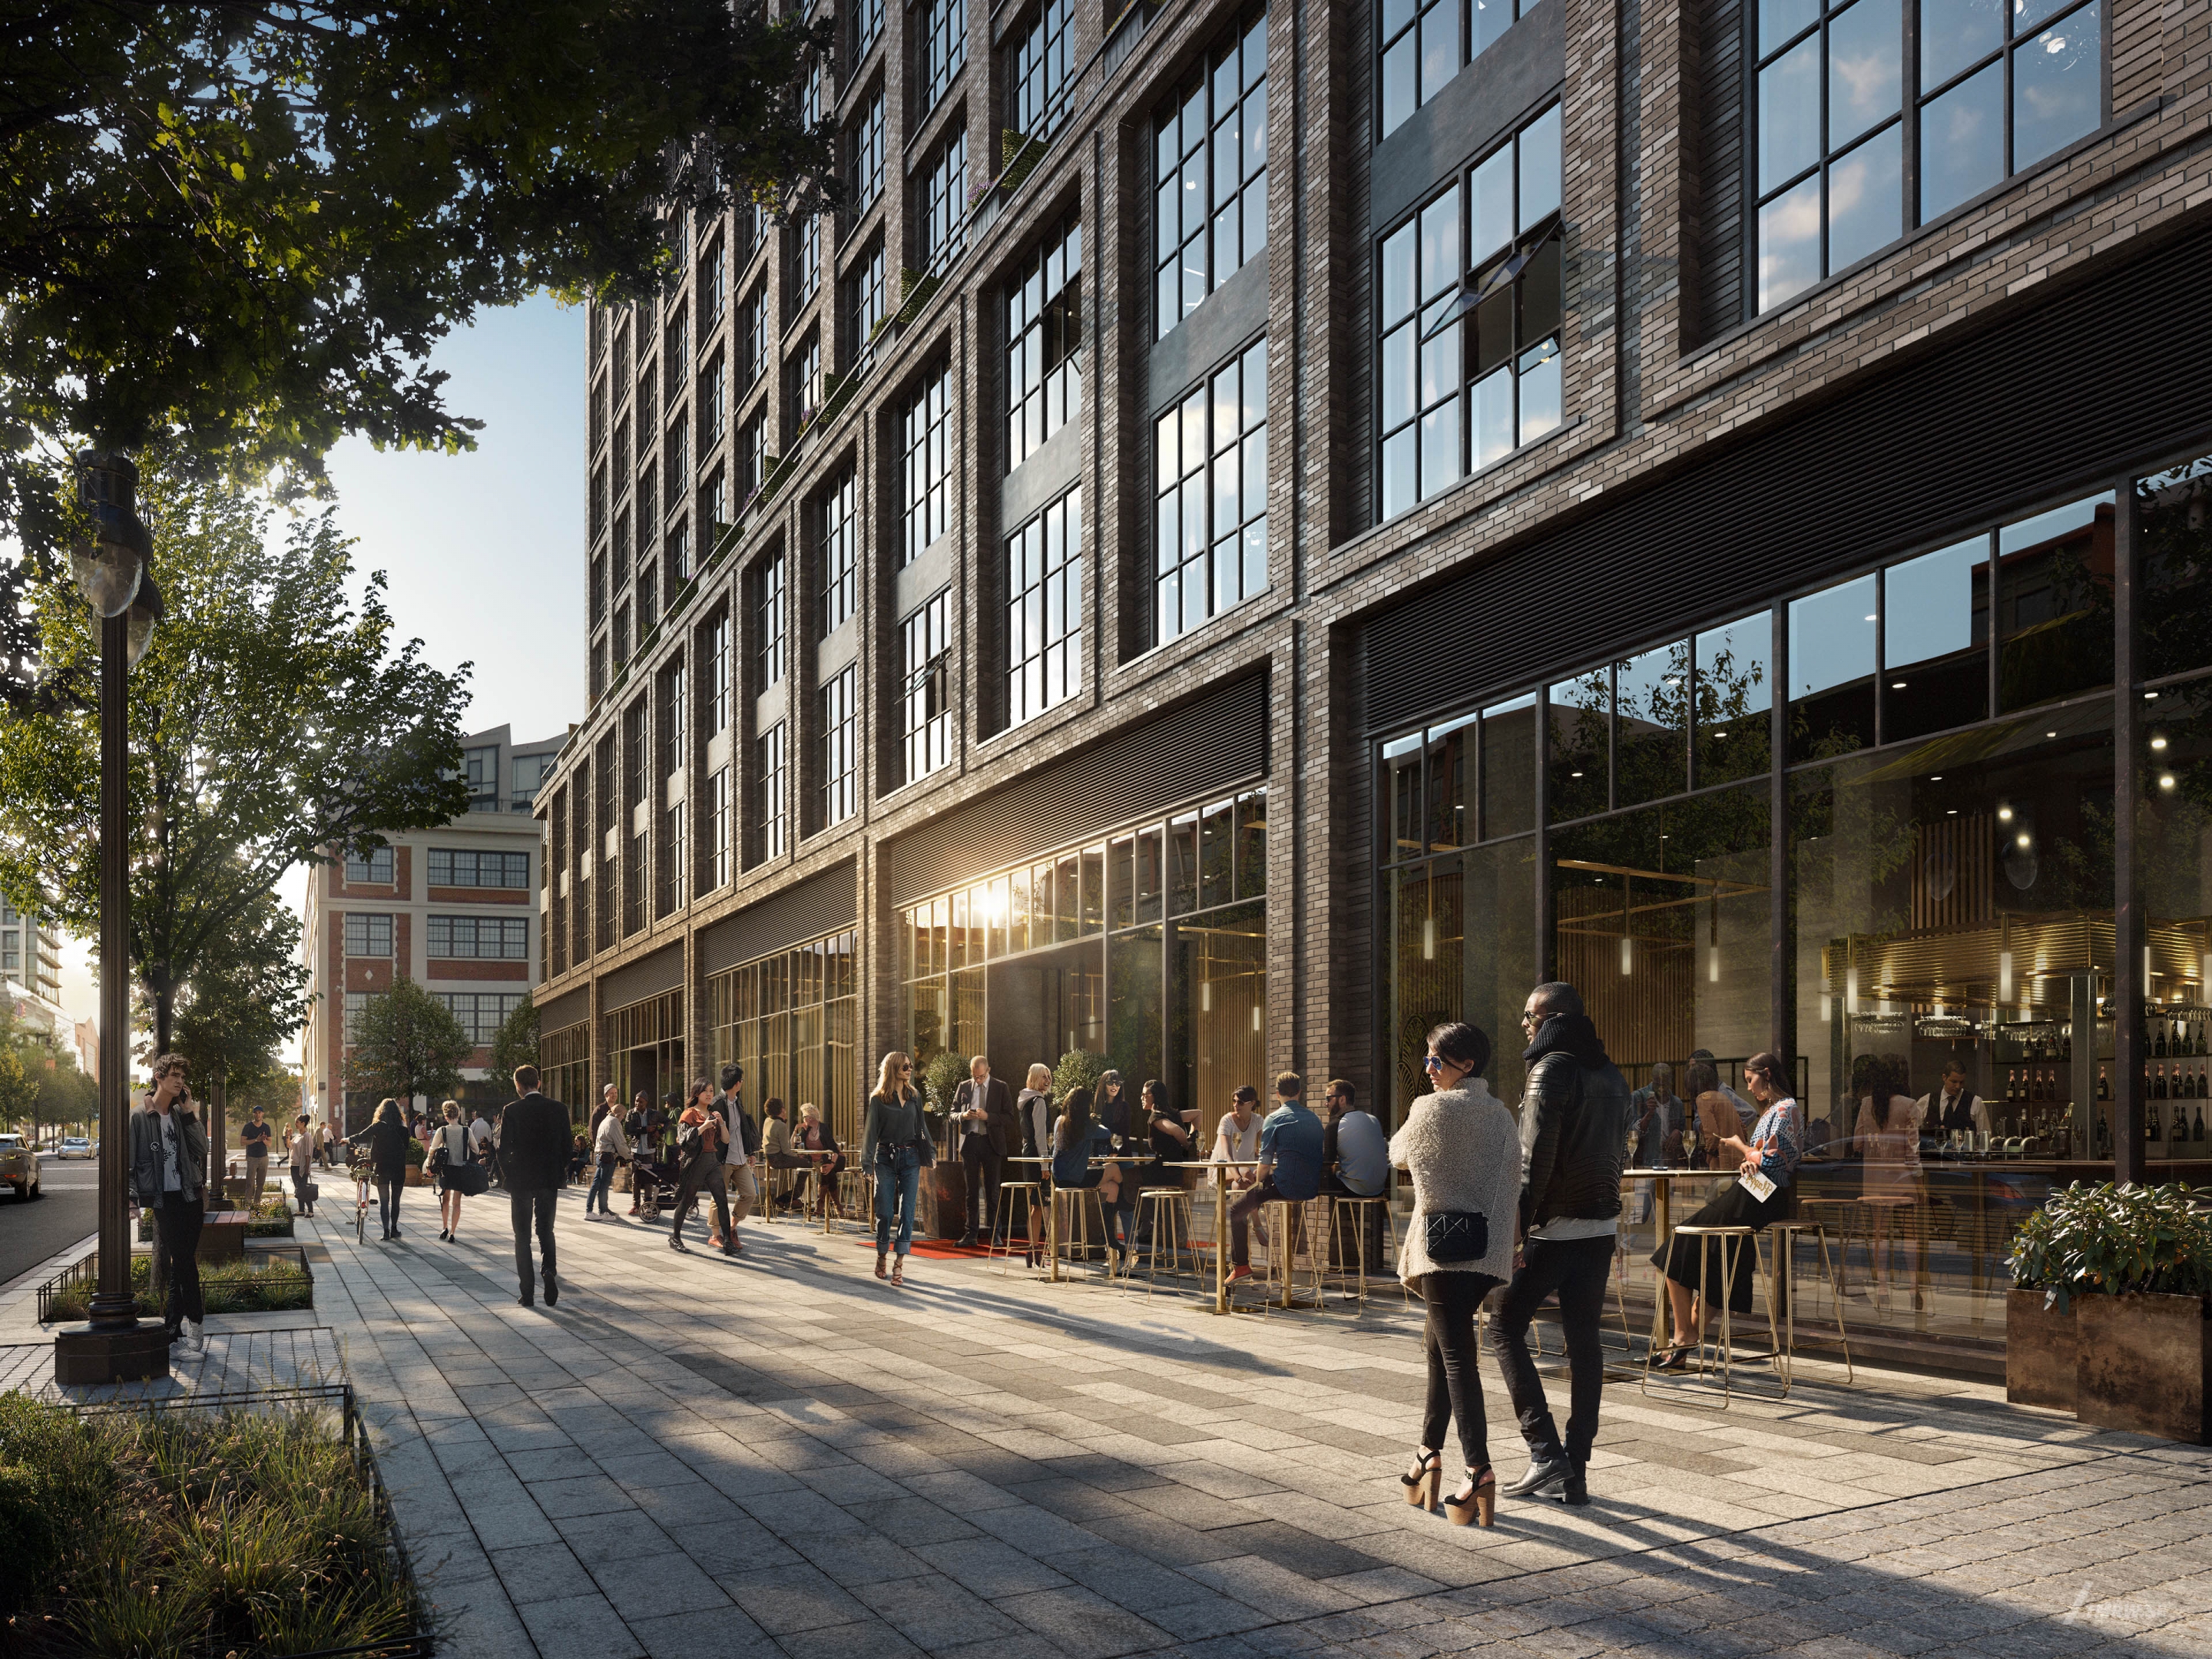 Architectural visualization of Parcel for Studios, exterior of busy city street in golden hour light